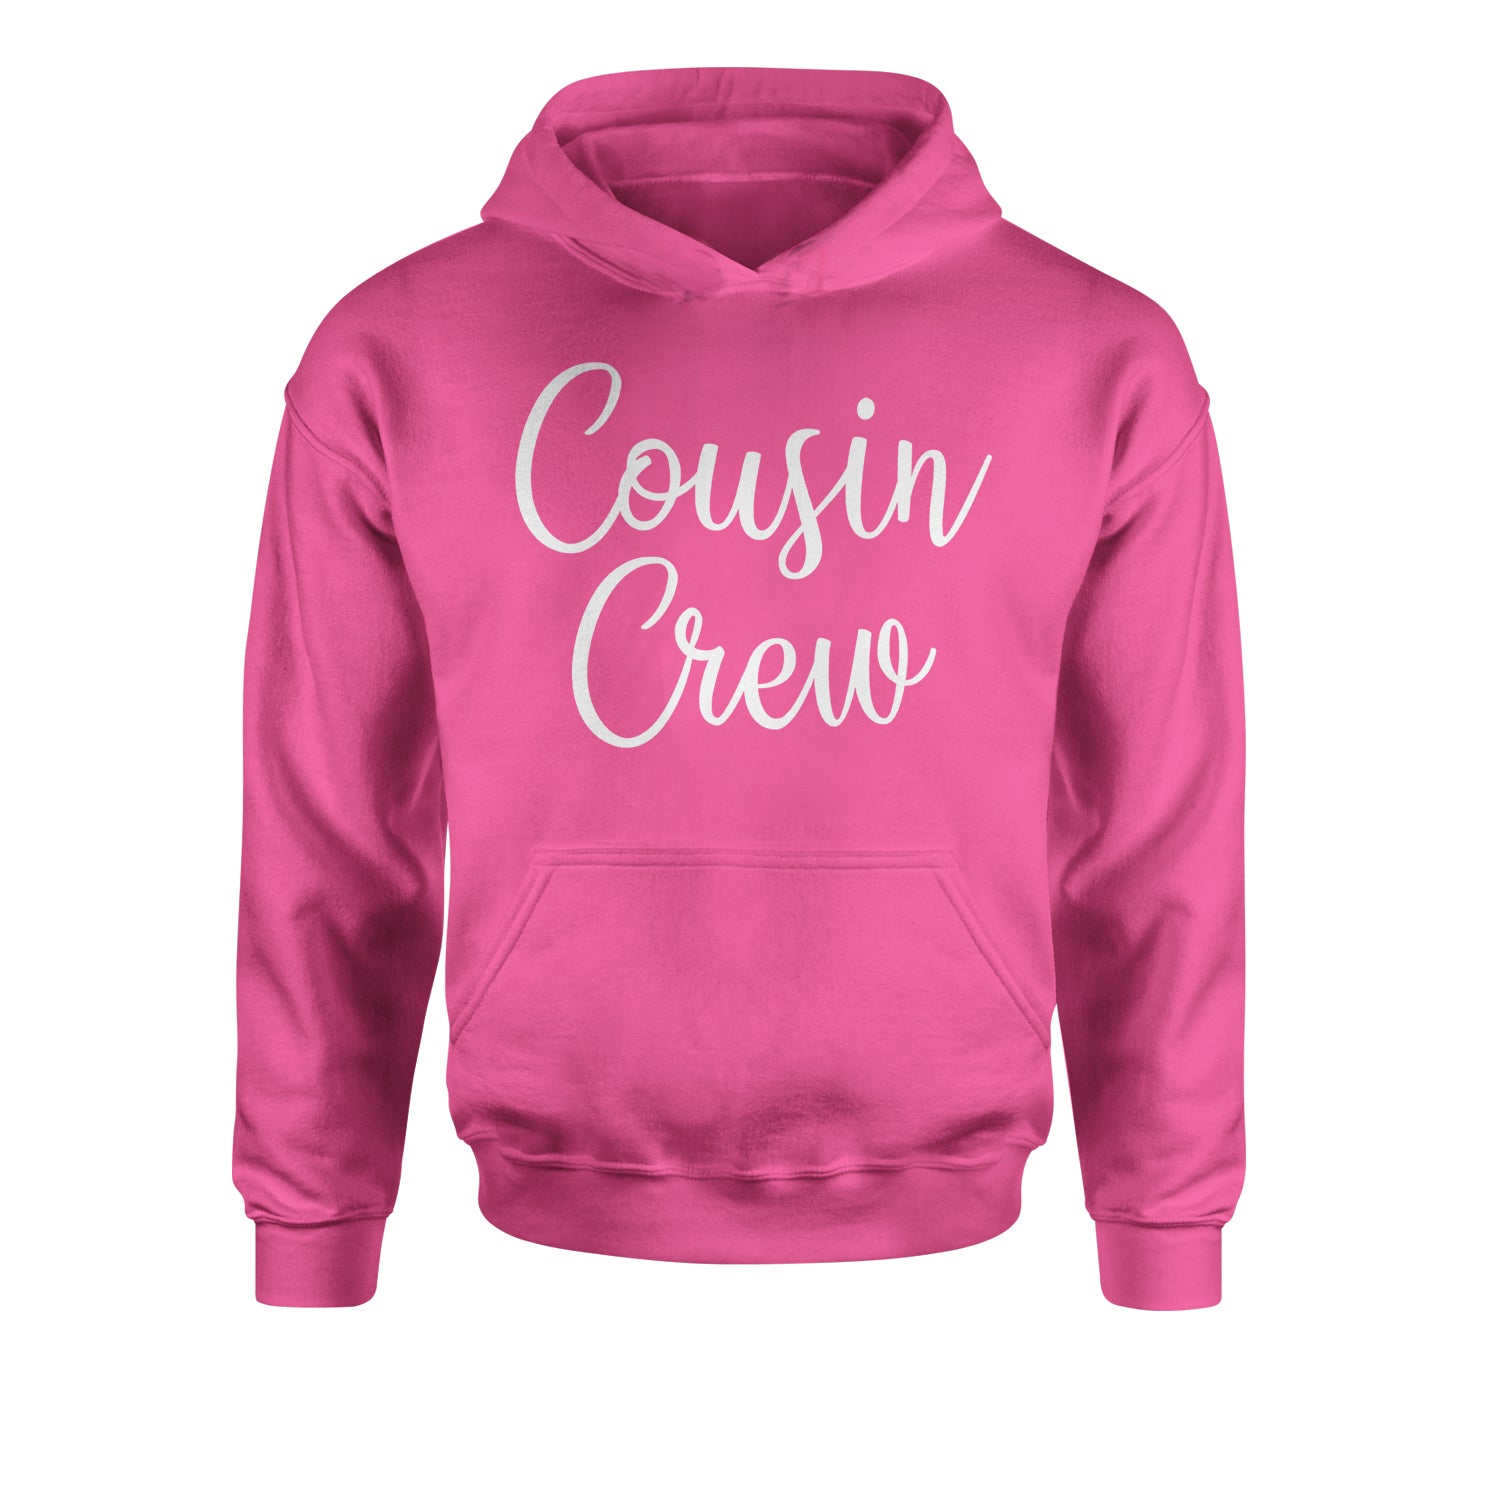 Cousin Crew Fun Family Outfit Youth-Sized Hoodie barbecue, bbq, cook, family, out, reunion by Expression Tees